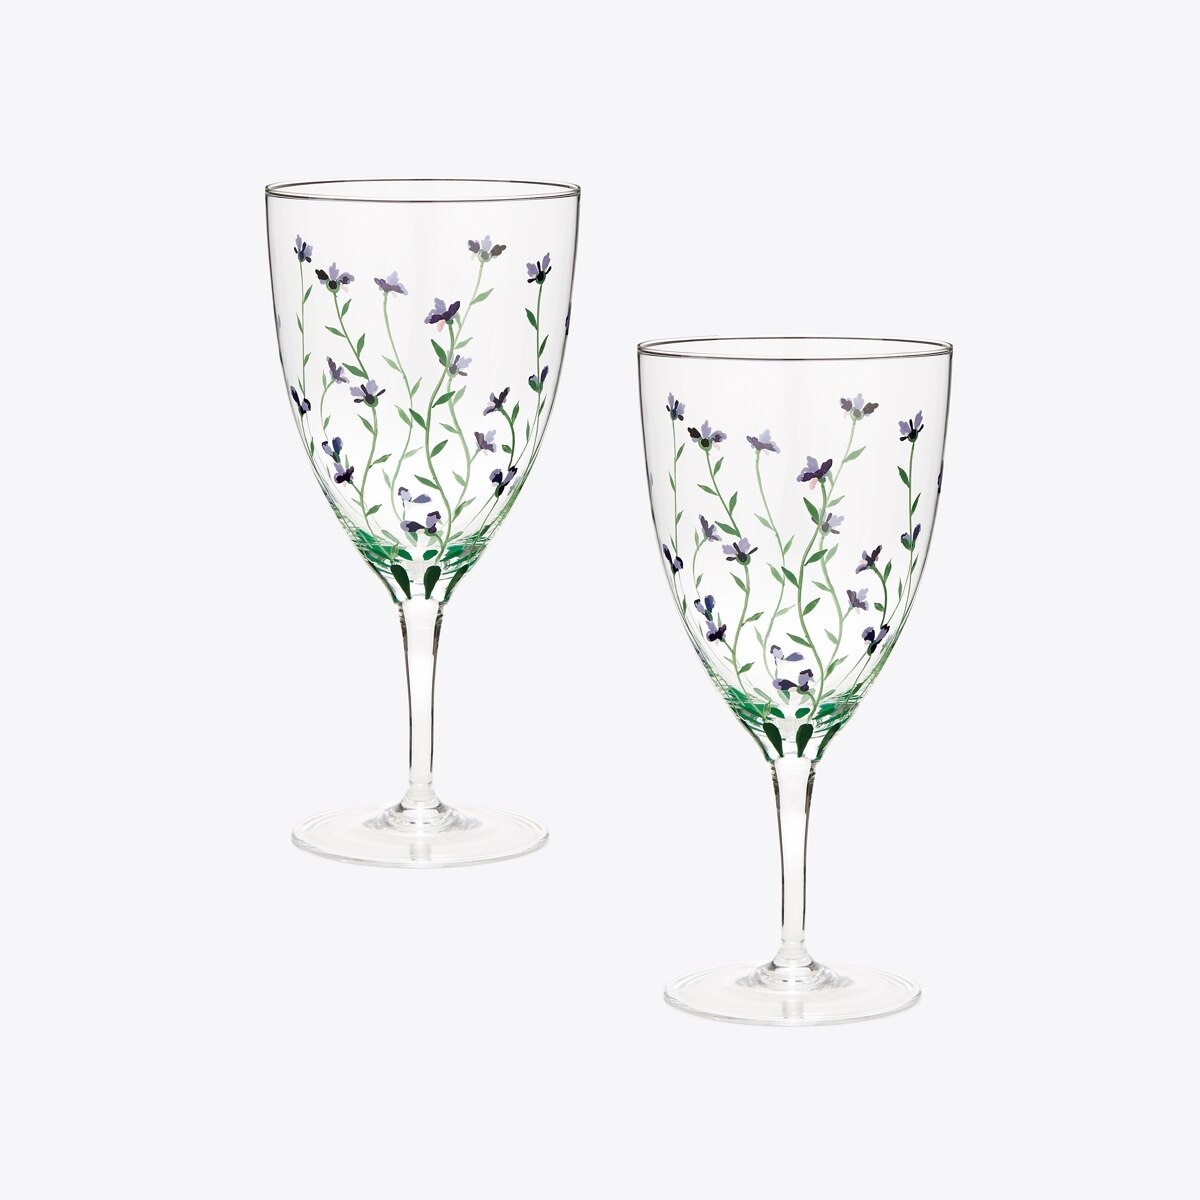 https://s7.toryburch.com/is/image/ToryBurch/style/jolie-fleur-water-glass--set-of-2-group.TB_89460_138_SLGRO.pdp-1200x1200.jpg